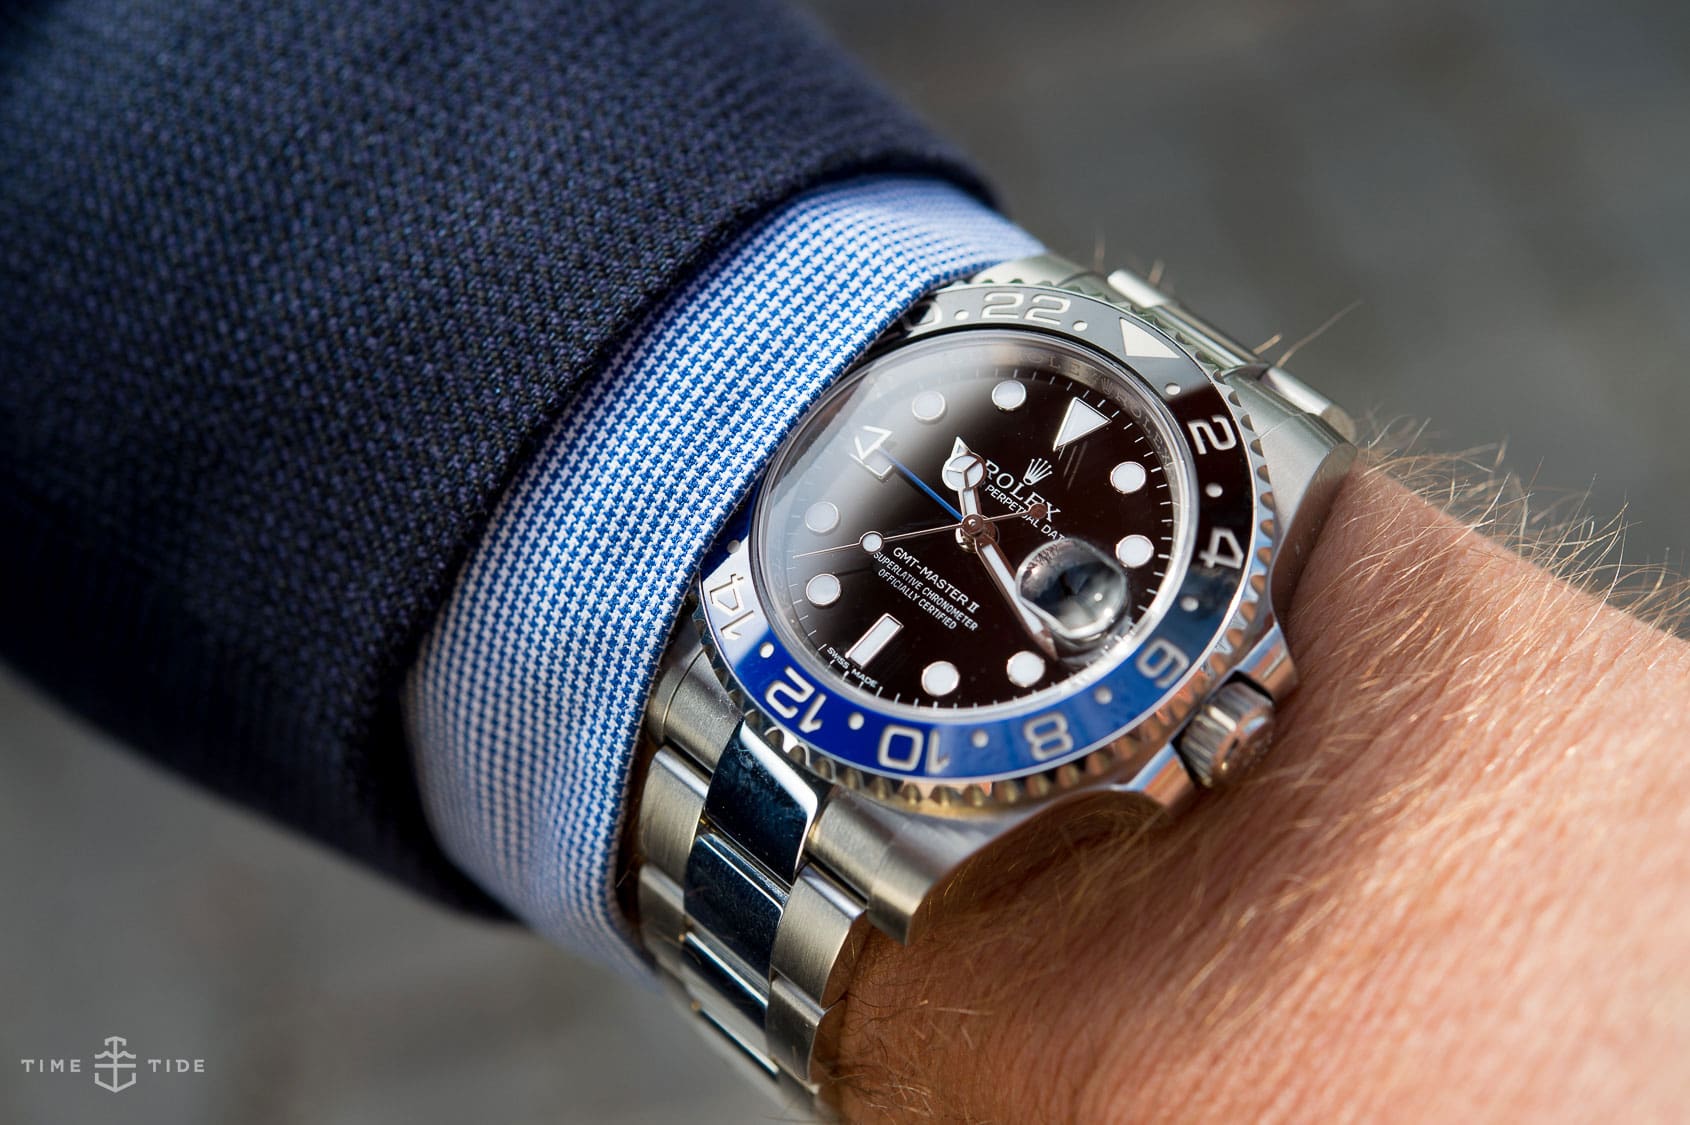 EDITOR’S PICK: Does the Rolex Batman still hold its own, now that there’s a new red and blue hero on the block?